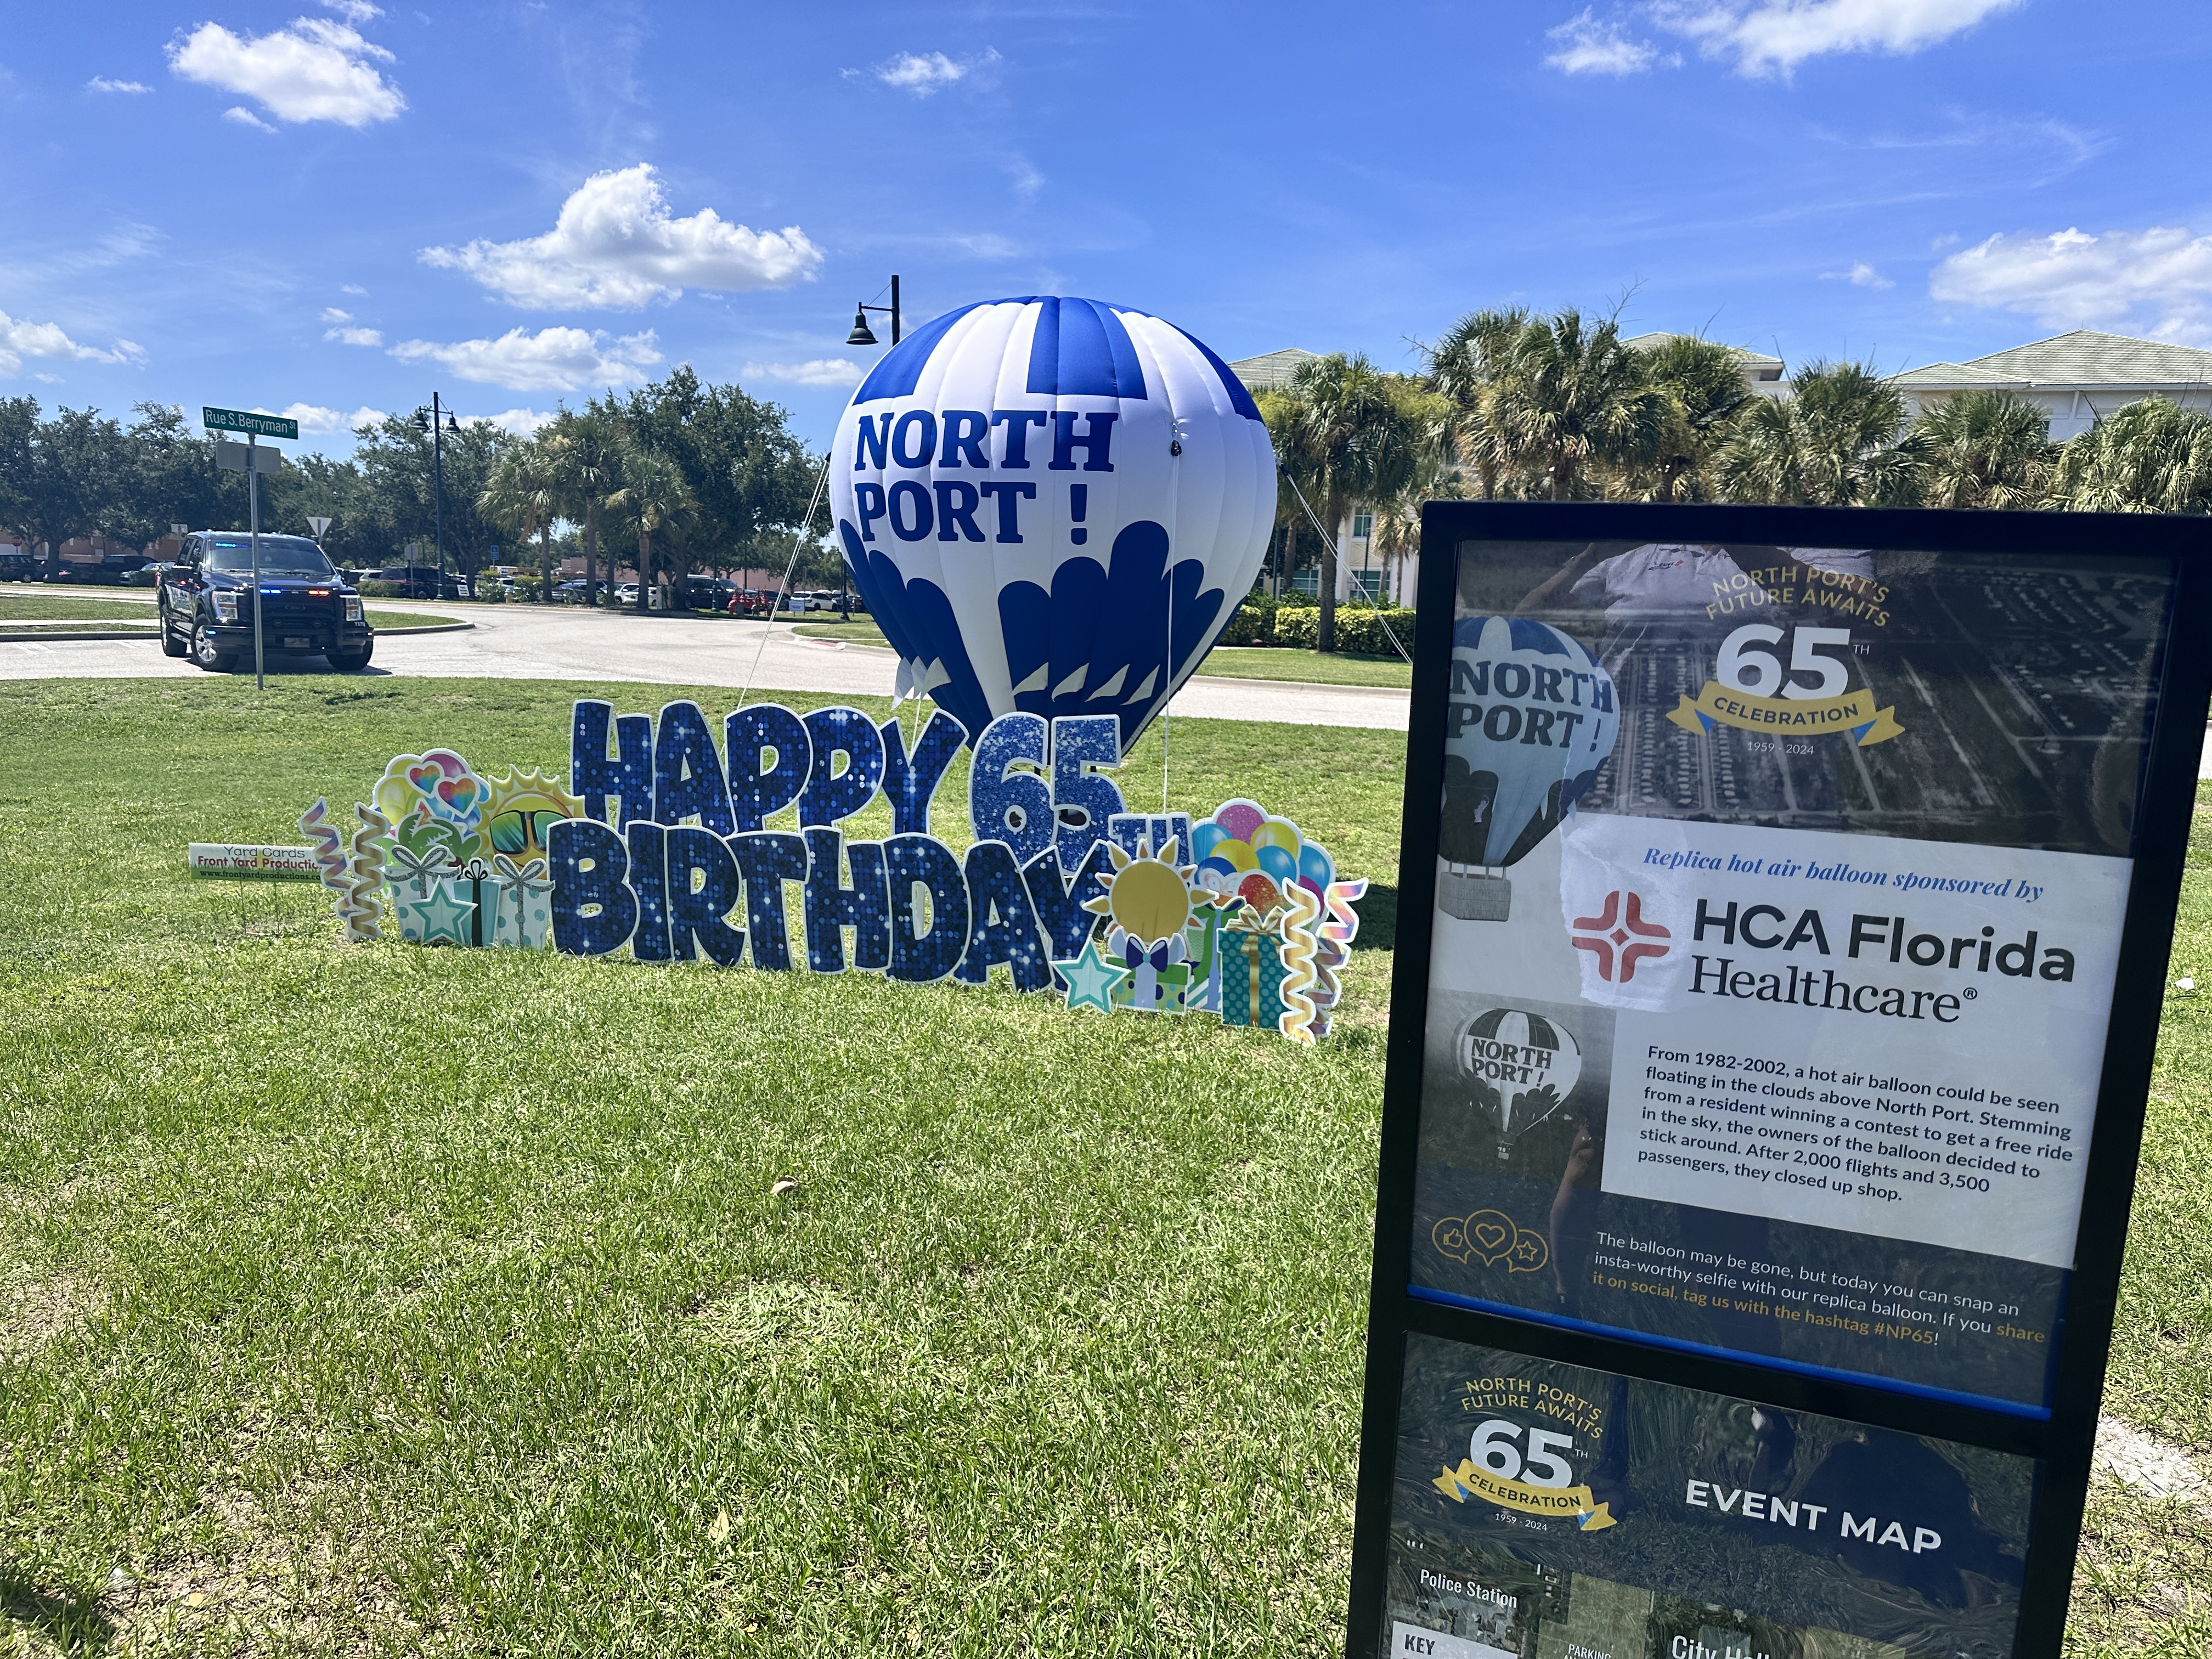 HCA Florida Healthcare hospitals are proud to be sponsors of the 65th birthday event for the City of North Port.